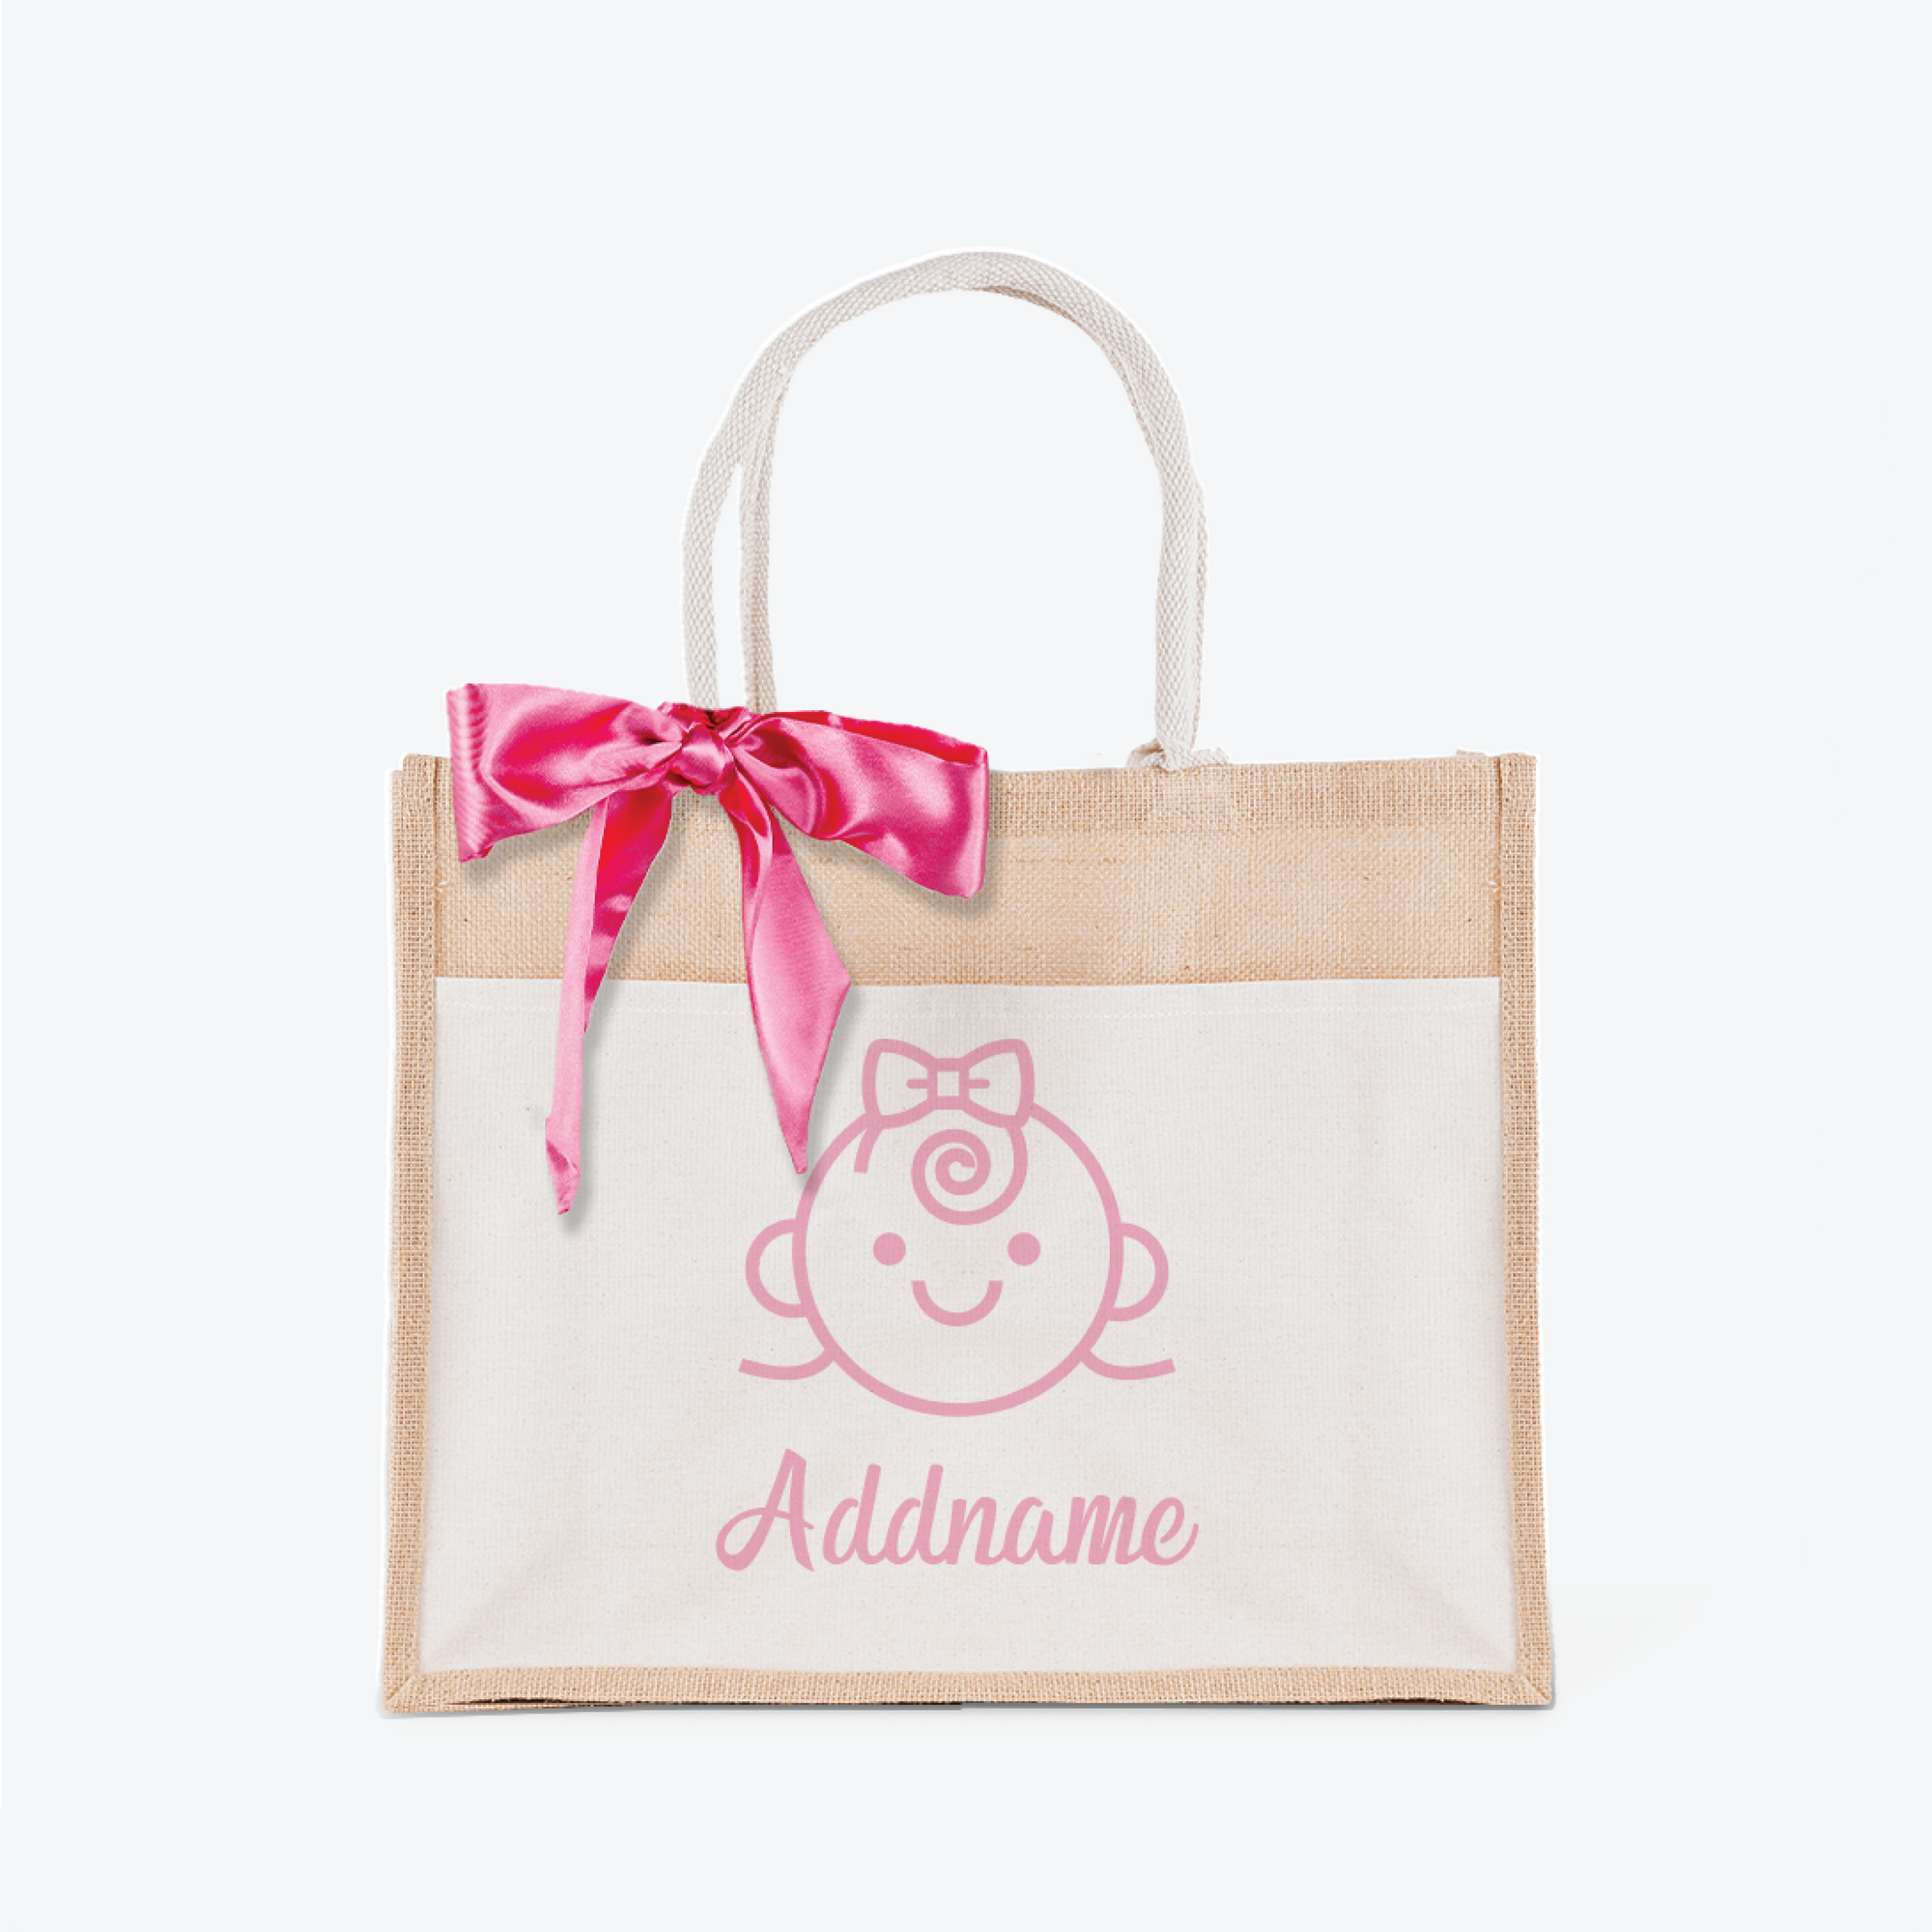 Dreamy Pink Jute Bag with Front Pocket